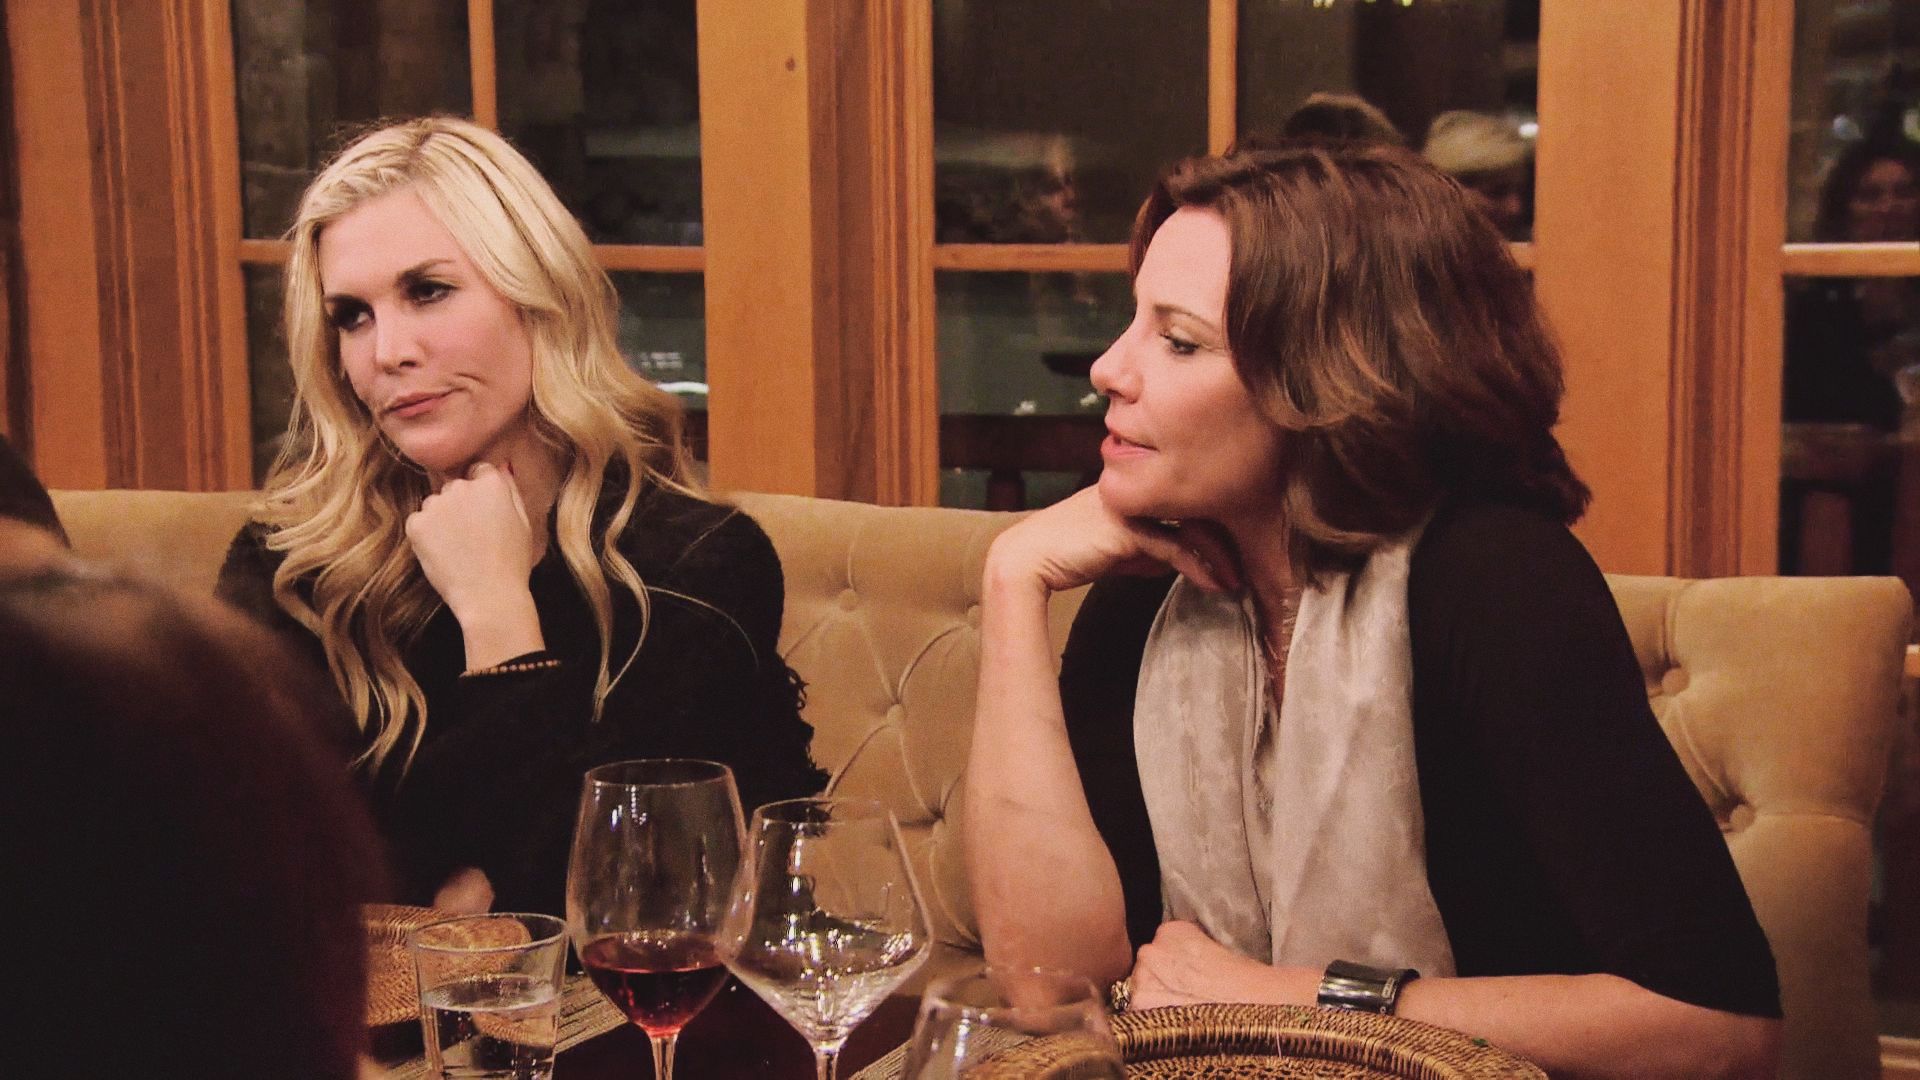 RHONY The Real Housewives of New York City S09E14 saison 9 épisode 14 A Slippery Slope